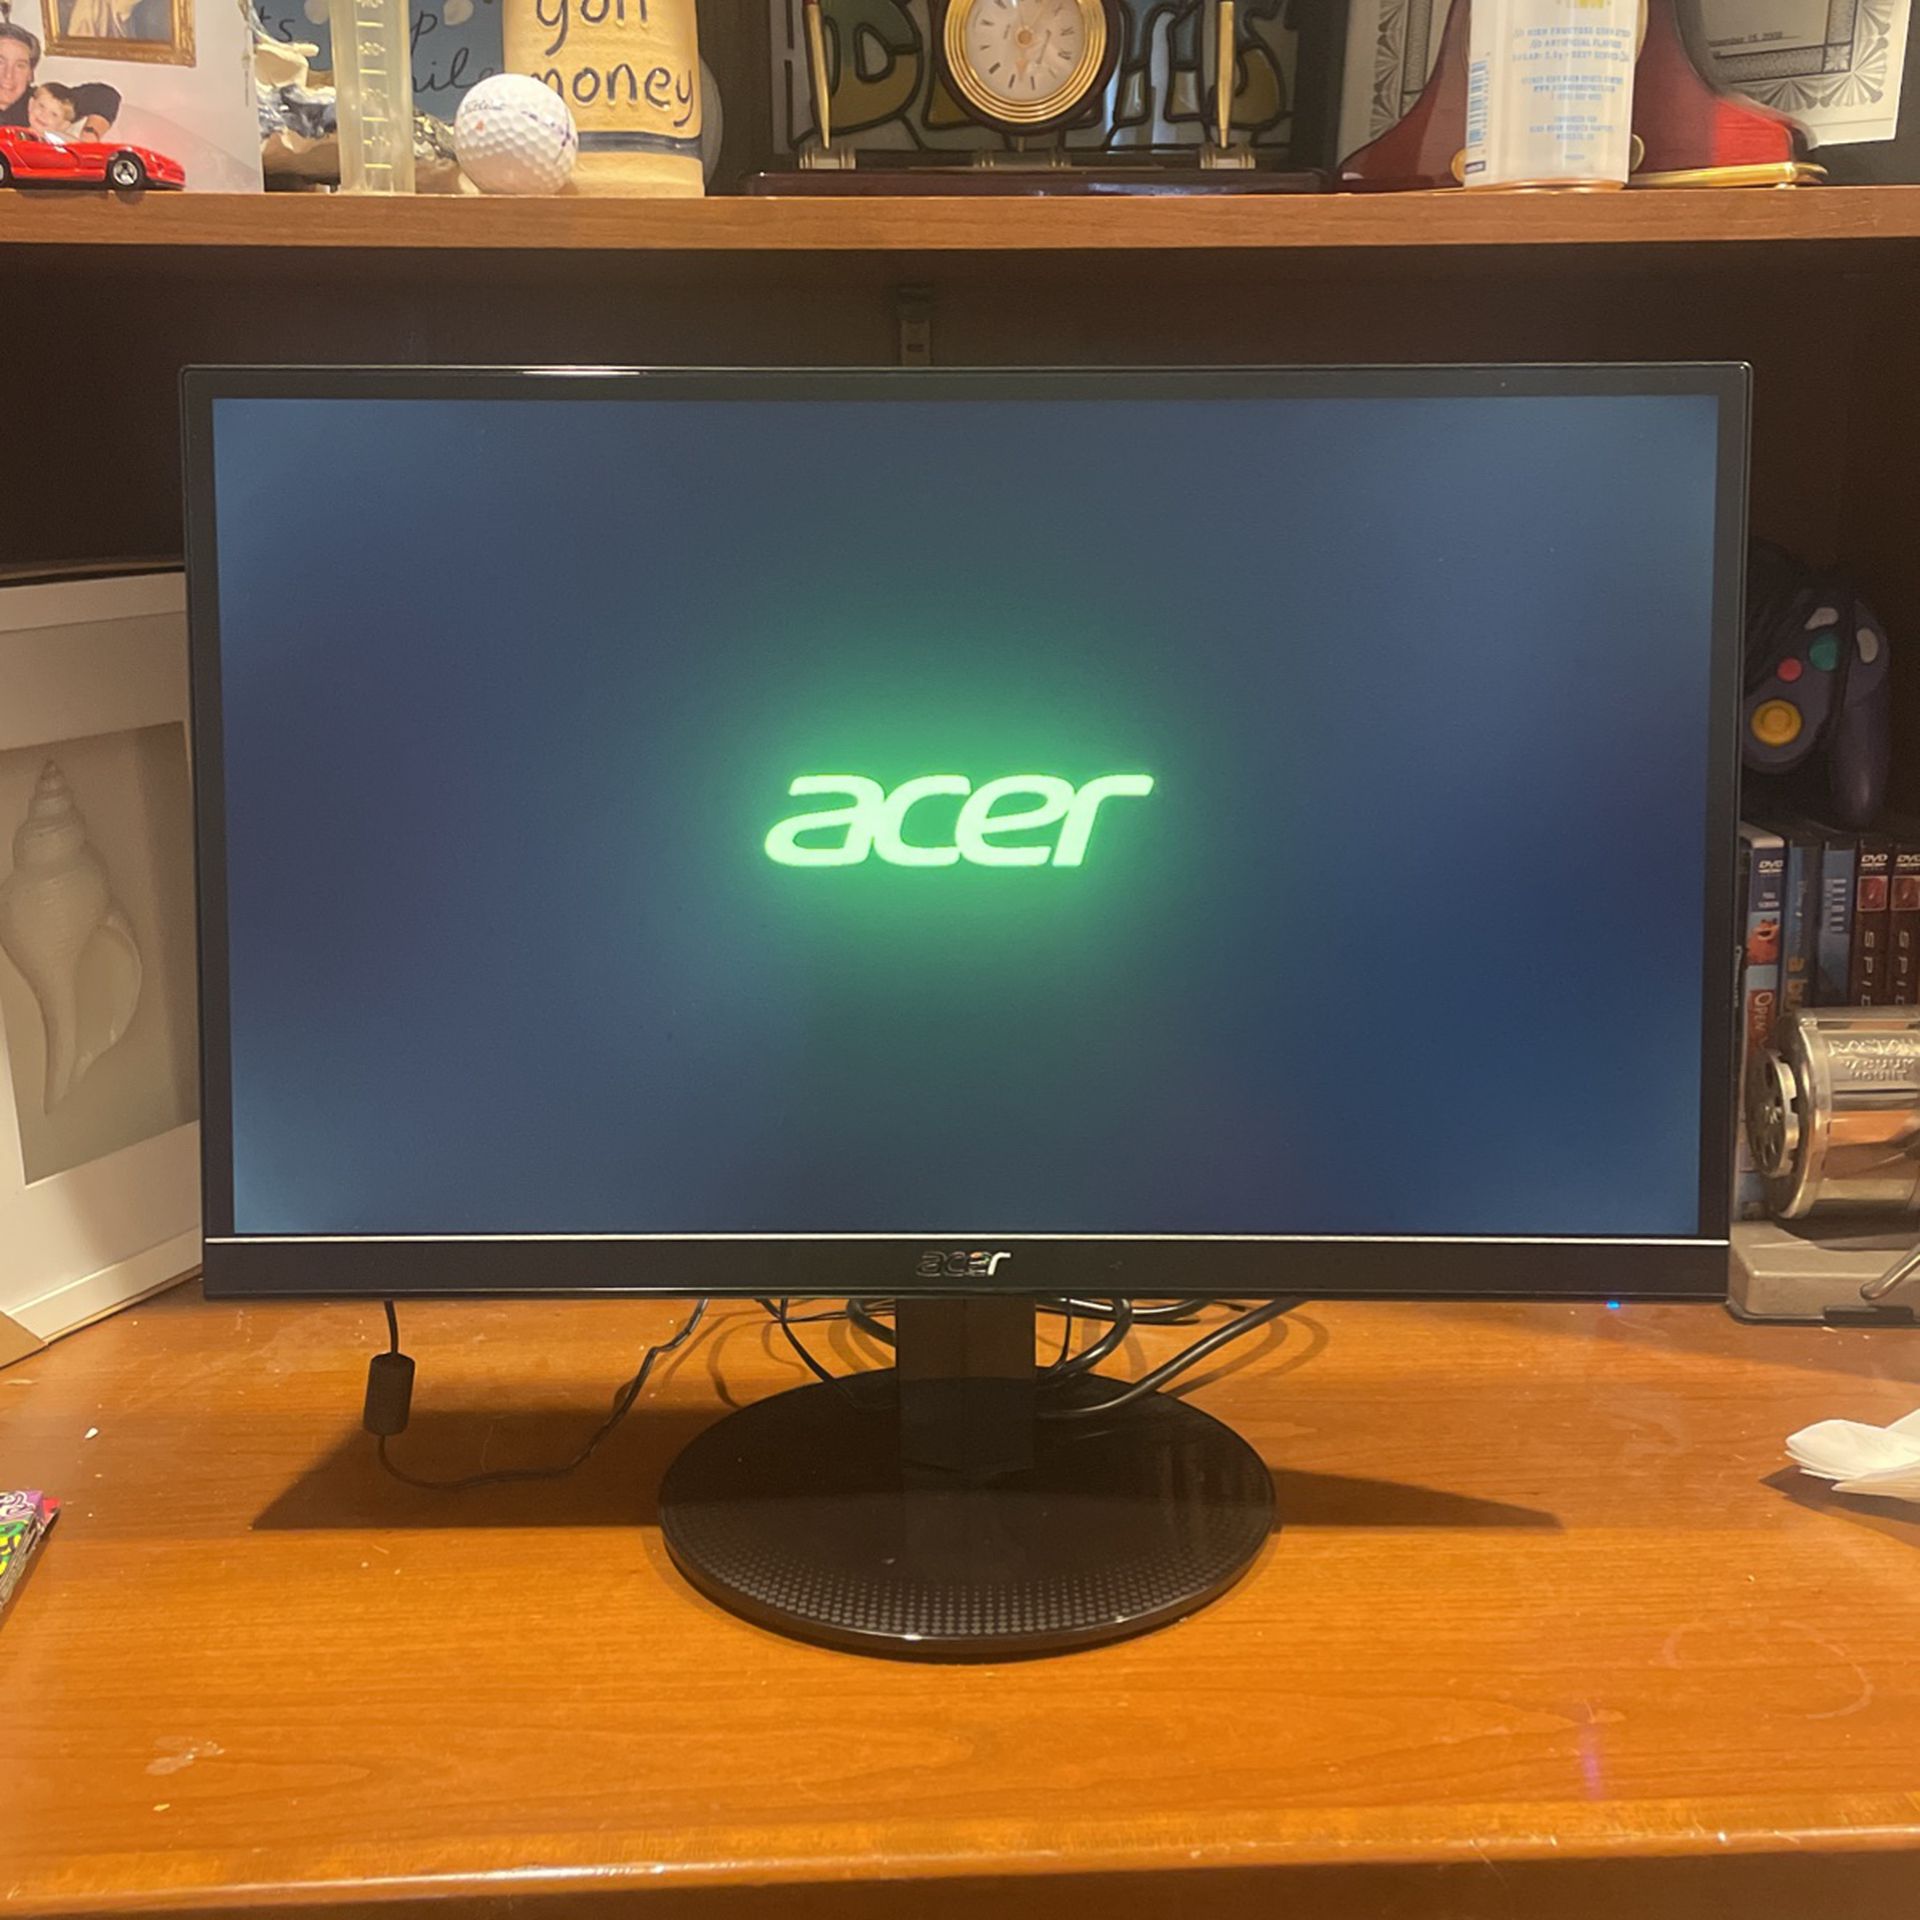 Acer 21.5 inch HD monitor